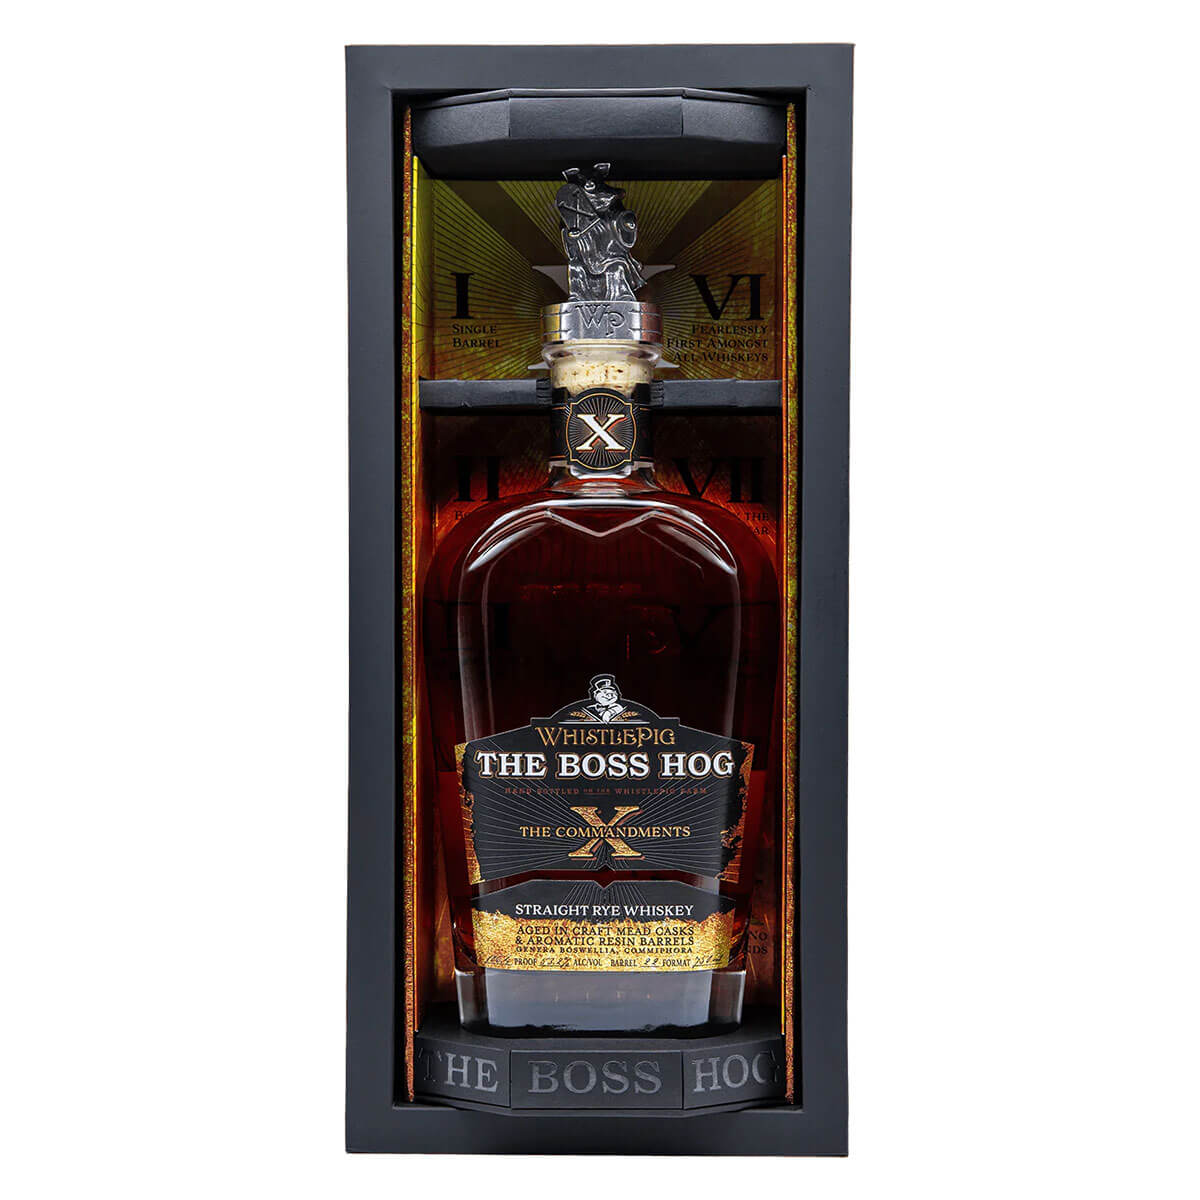 WhistlePig The Boss Hog X "The Commandments" bottle in box